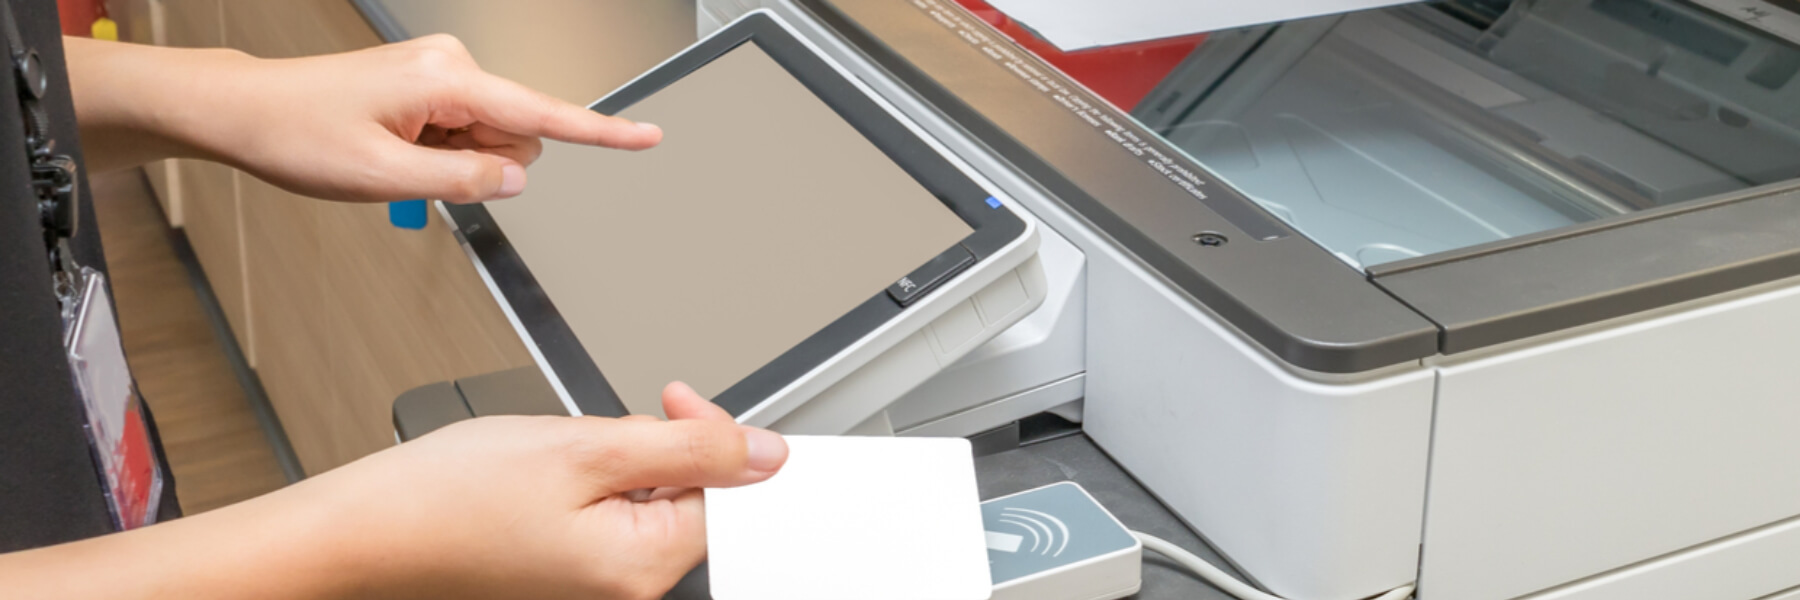 multifunction printers, security card protection, data protected by mfp